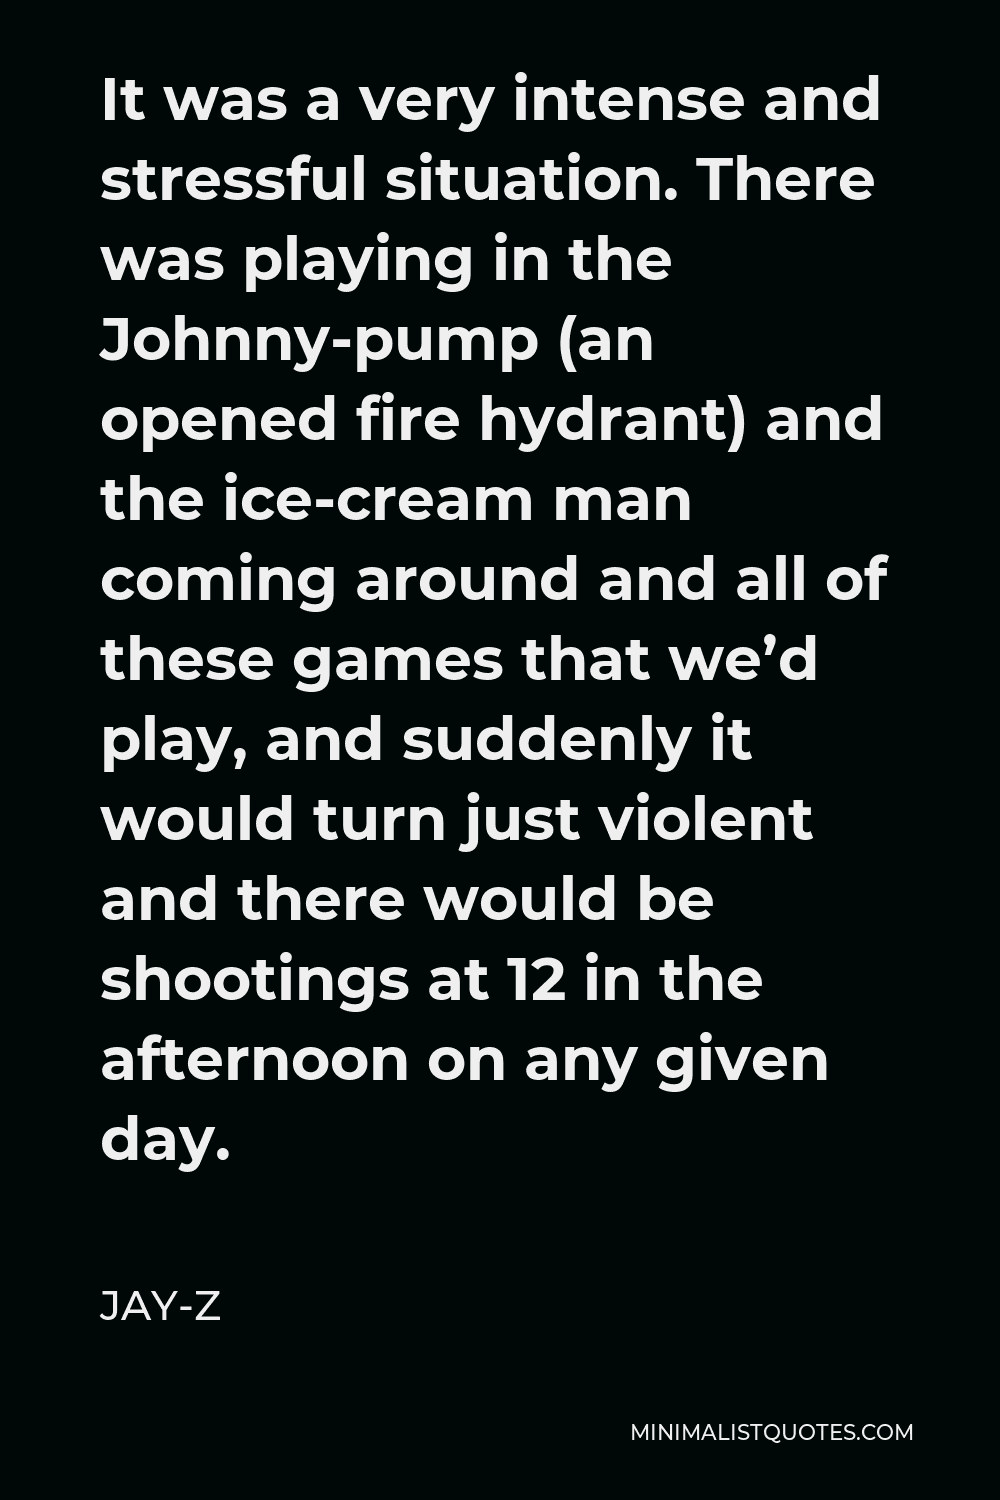 Jay-Z Quote - It was a very intense and stressful situation. There was playing in the Johnny-pump (an opened fire hydrant) and the ice-cream man coming around and all of these games that we’d play, and suddenly it would turn just violent and there would be shootings at 12 in the afternoon on any given day.